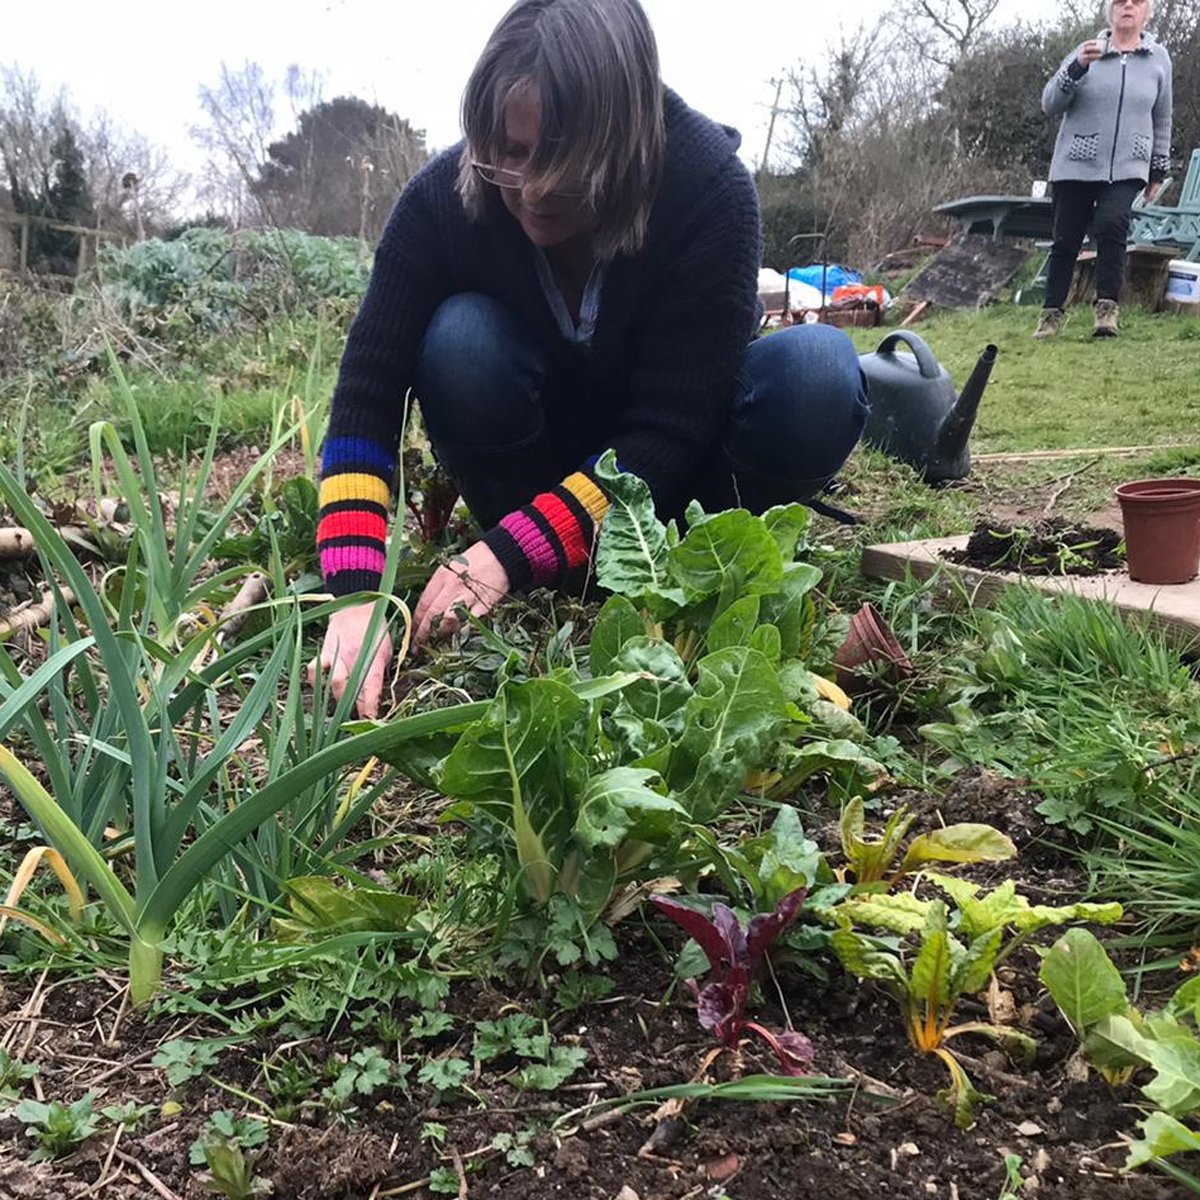 Permaculture Scholar, Jo, Tells Us What the Course Has Meant to Her